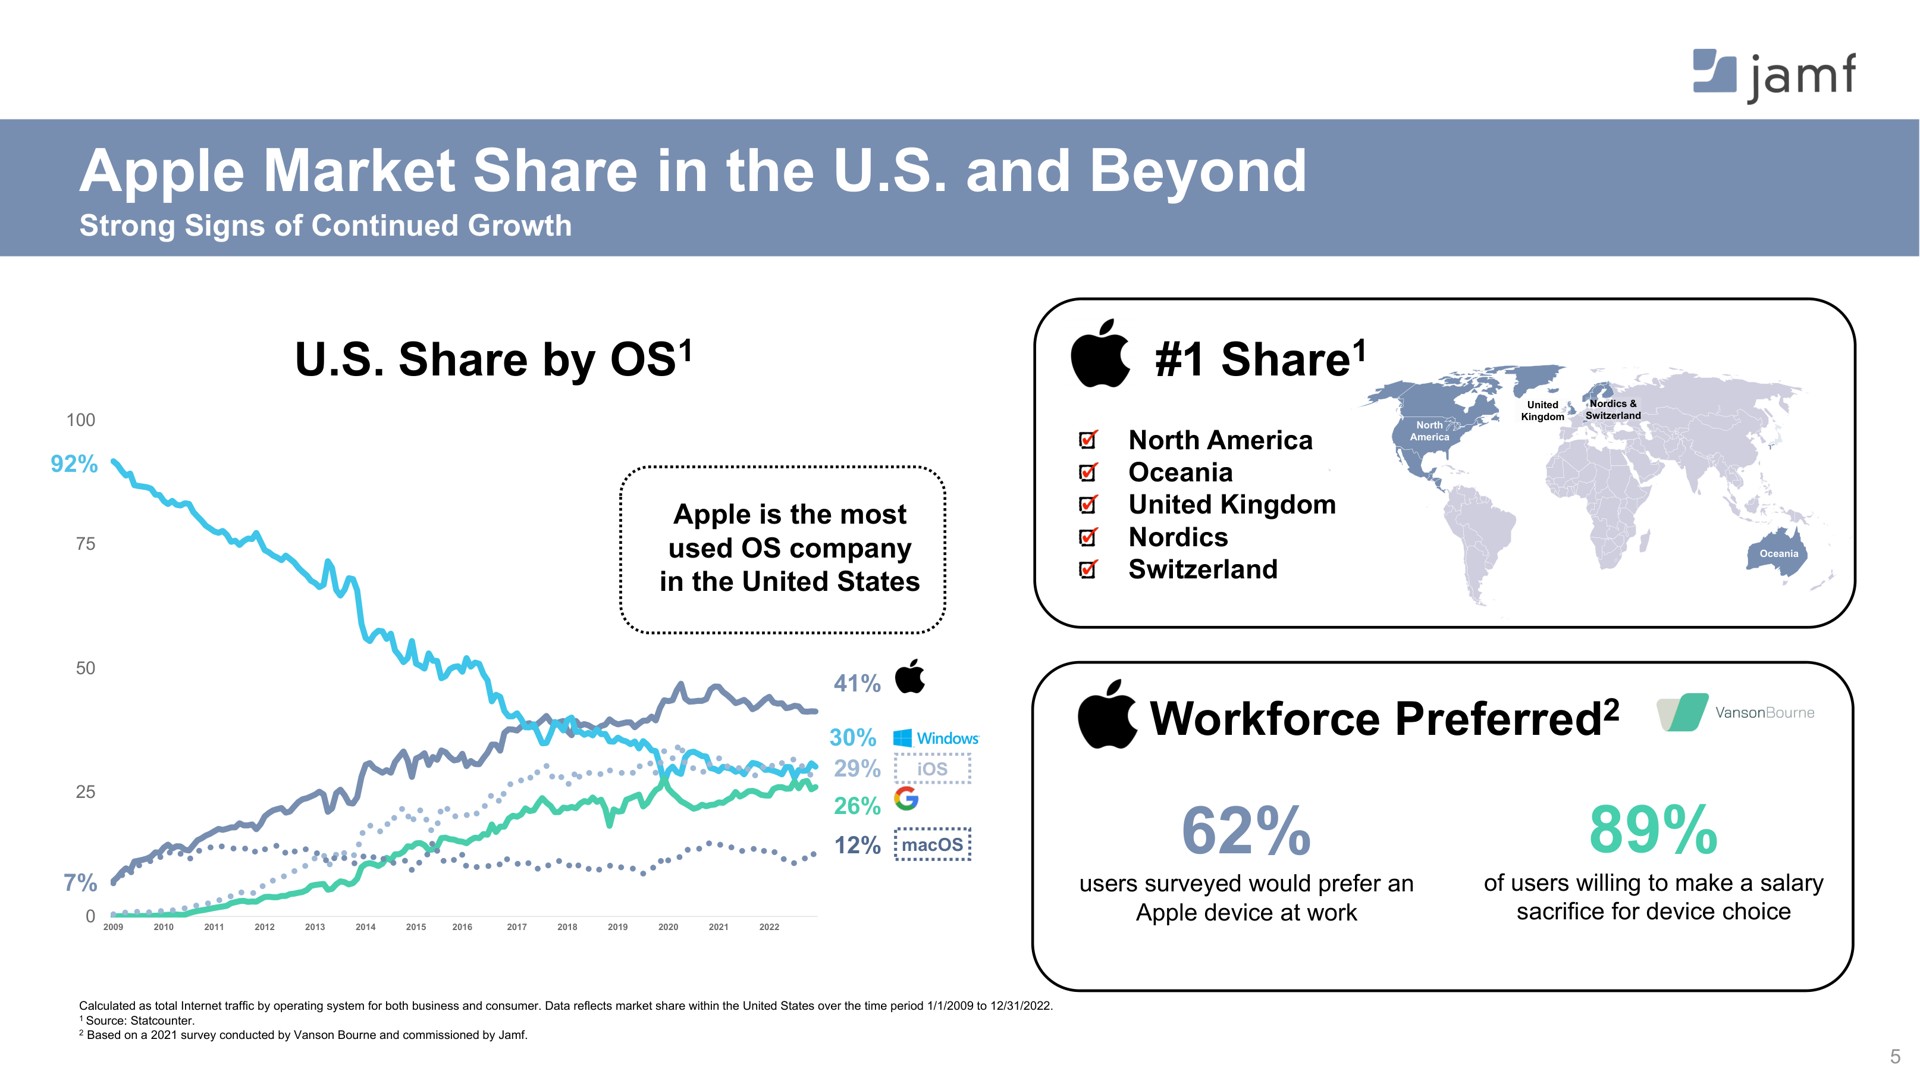 apple market share in the and beyond a preferred | Jamf